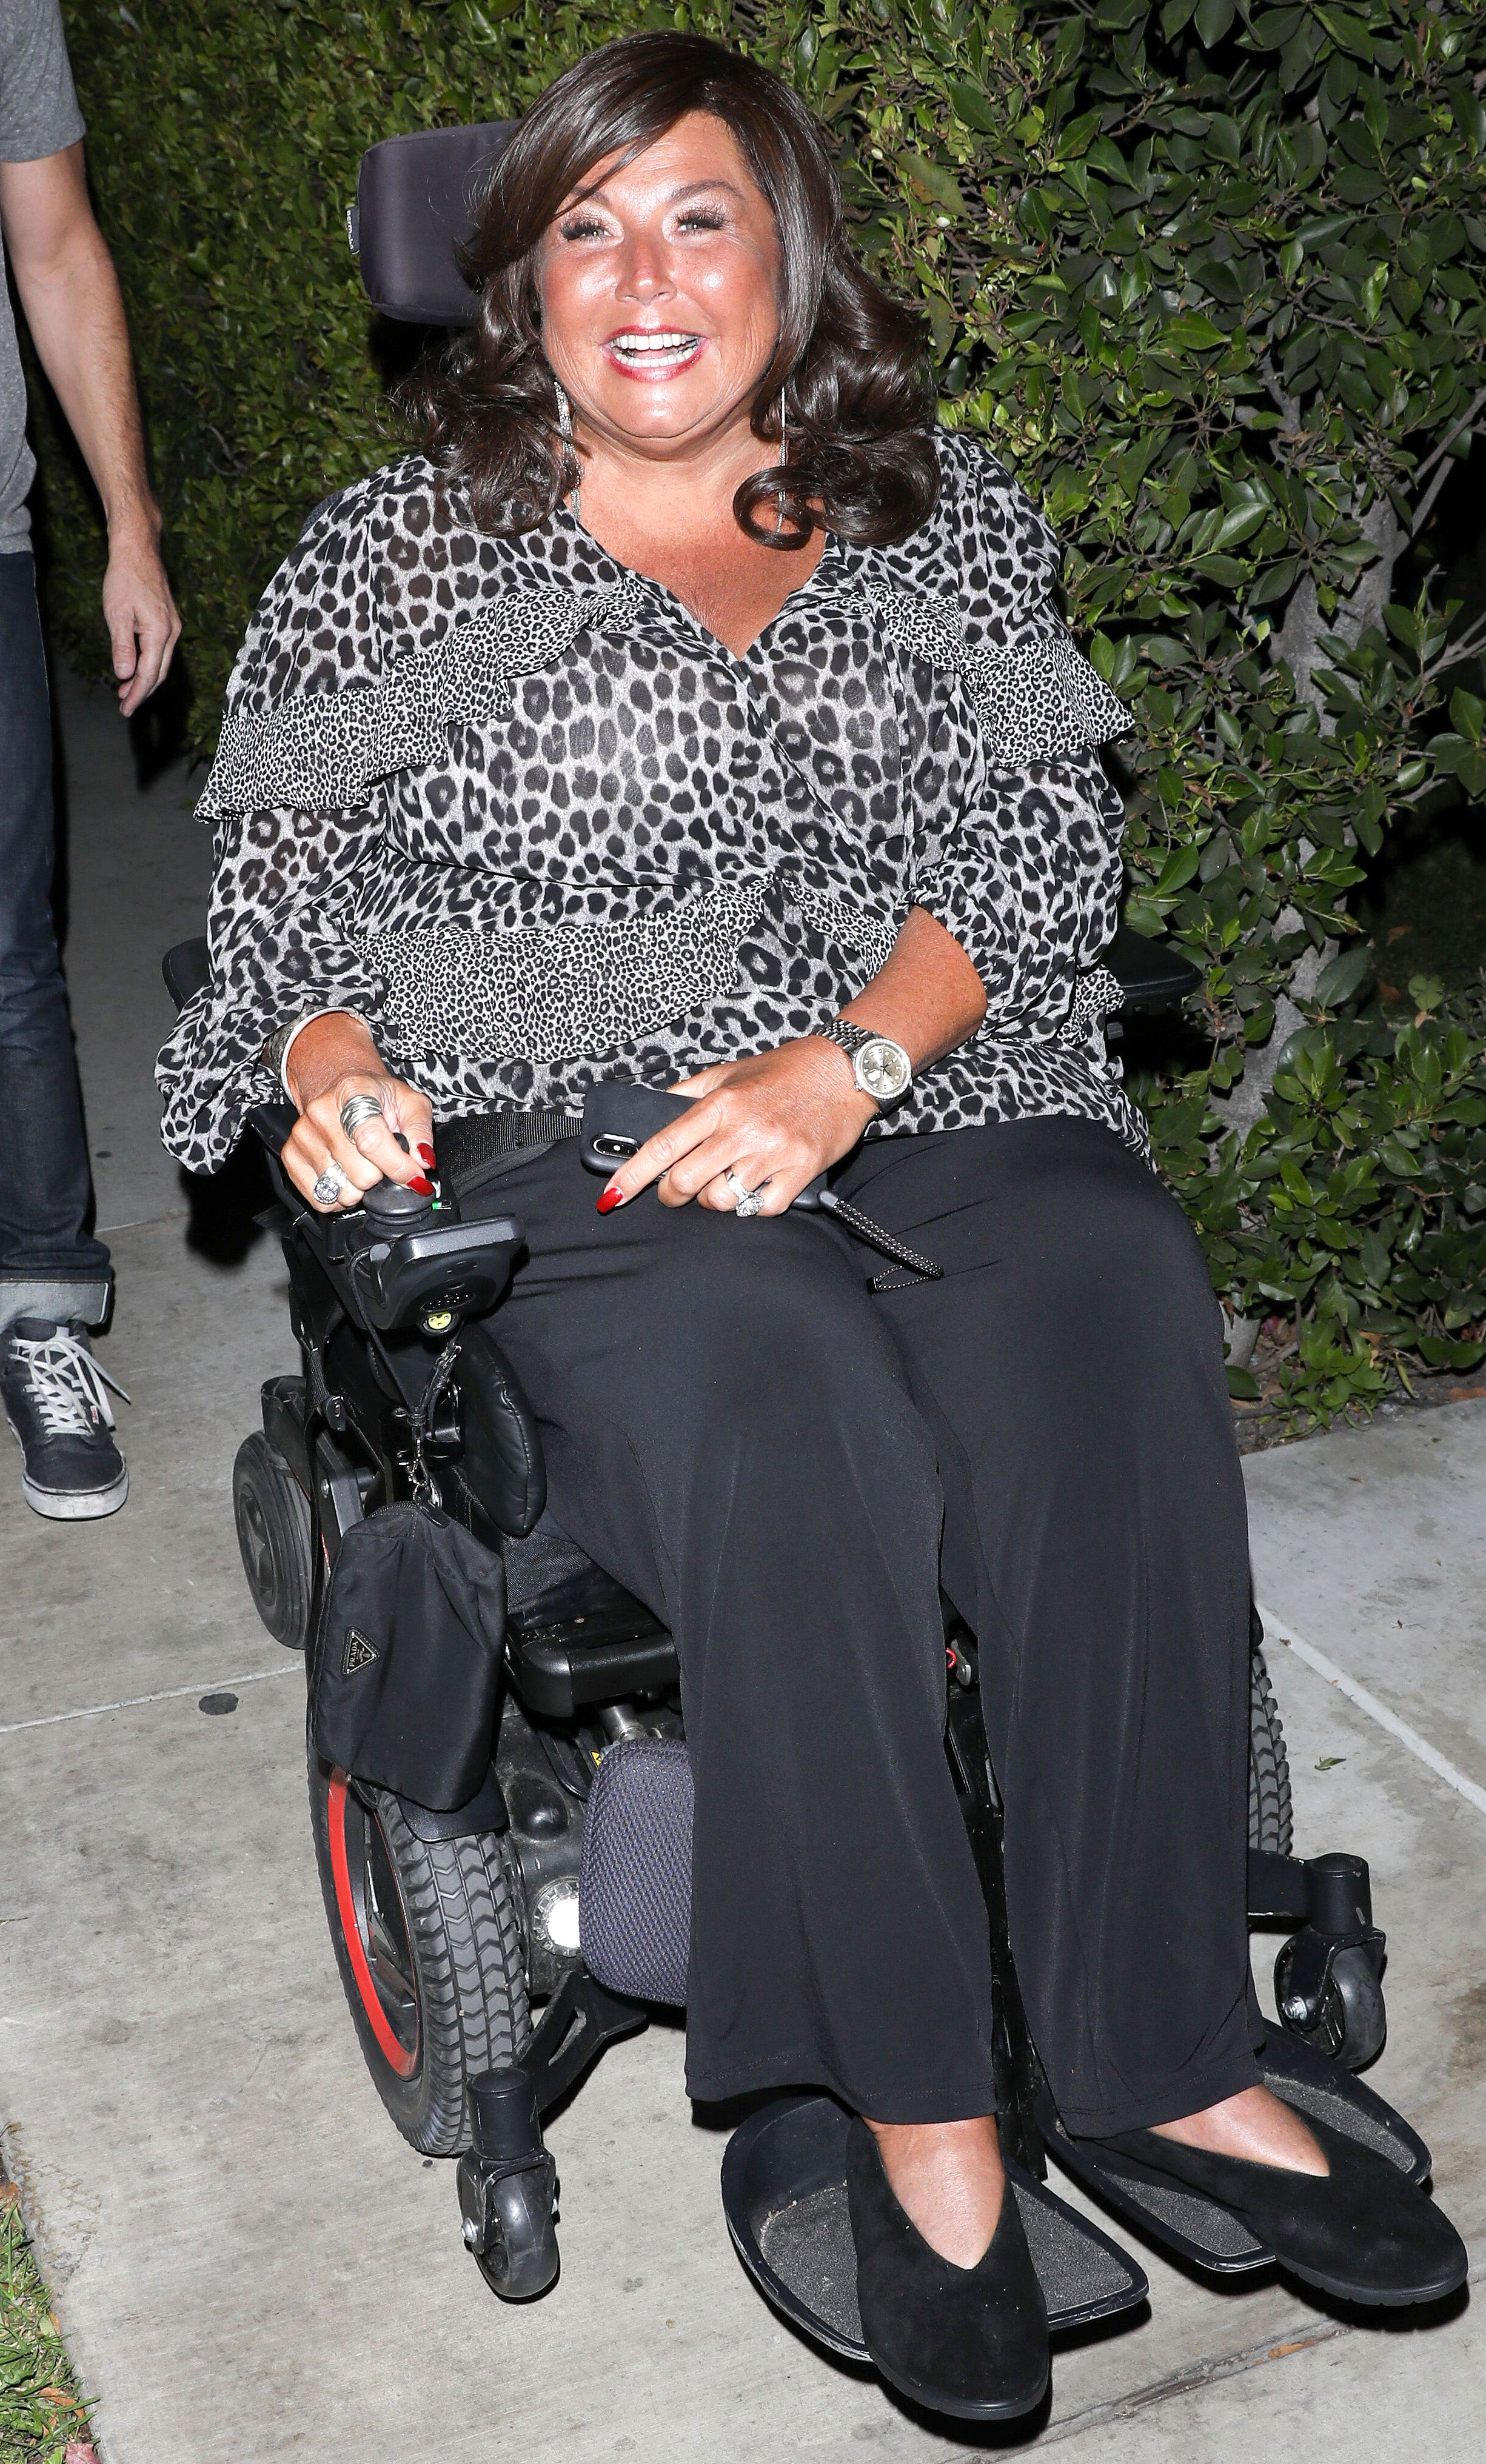 Abby Lee Miller Has 'Sixth and Hopefully' Final Lumbar Injection